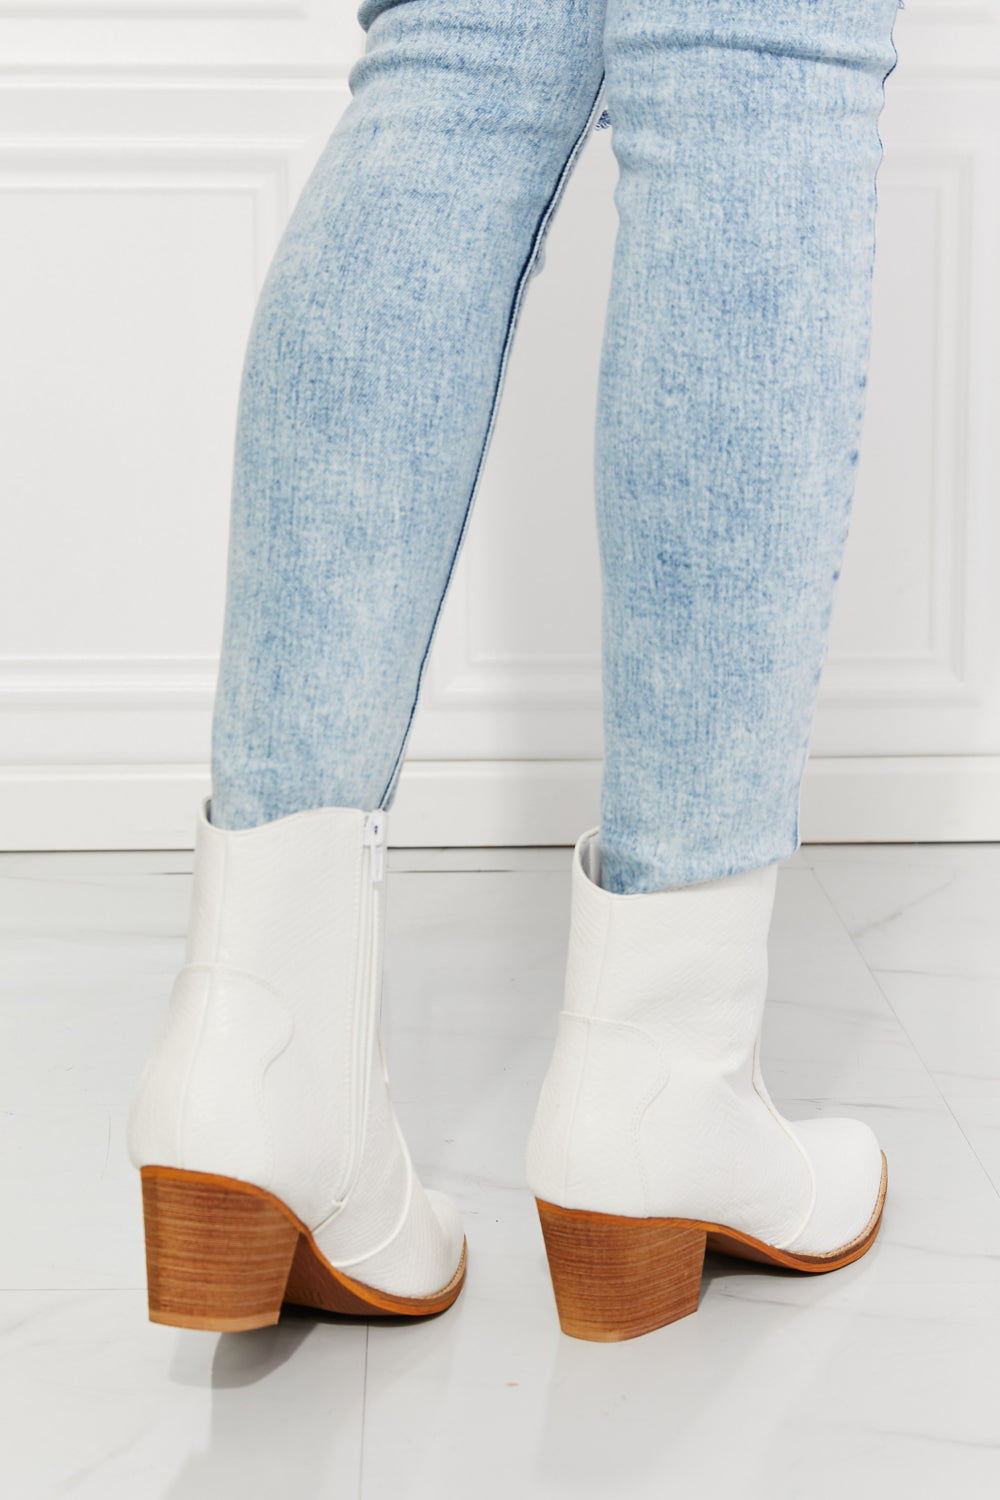 MMShoes Watertower Town Faux Leather Western Ankle Boots in White - FunkyPeacockStore (Store description)